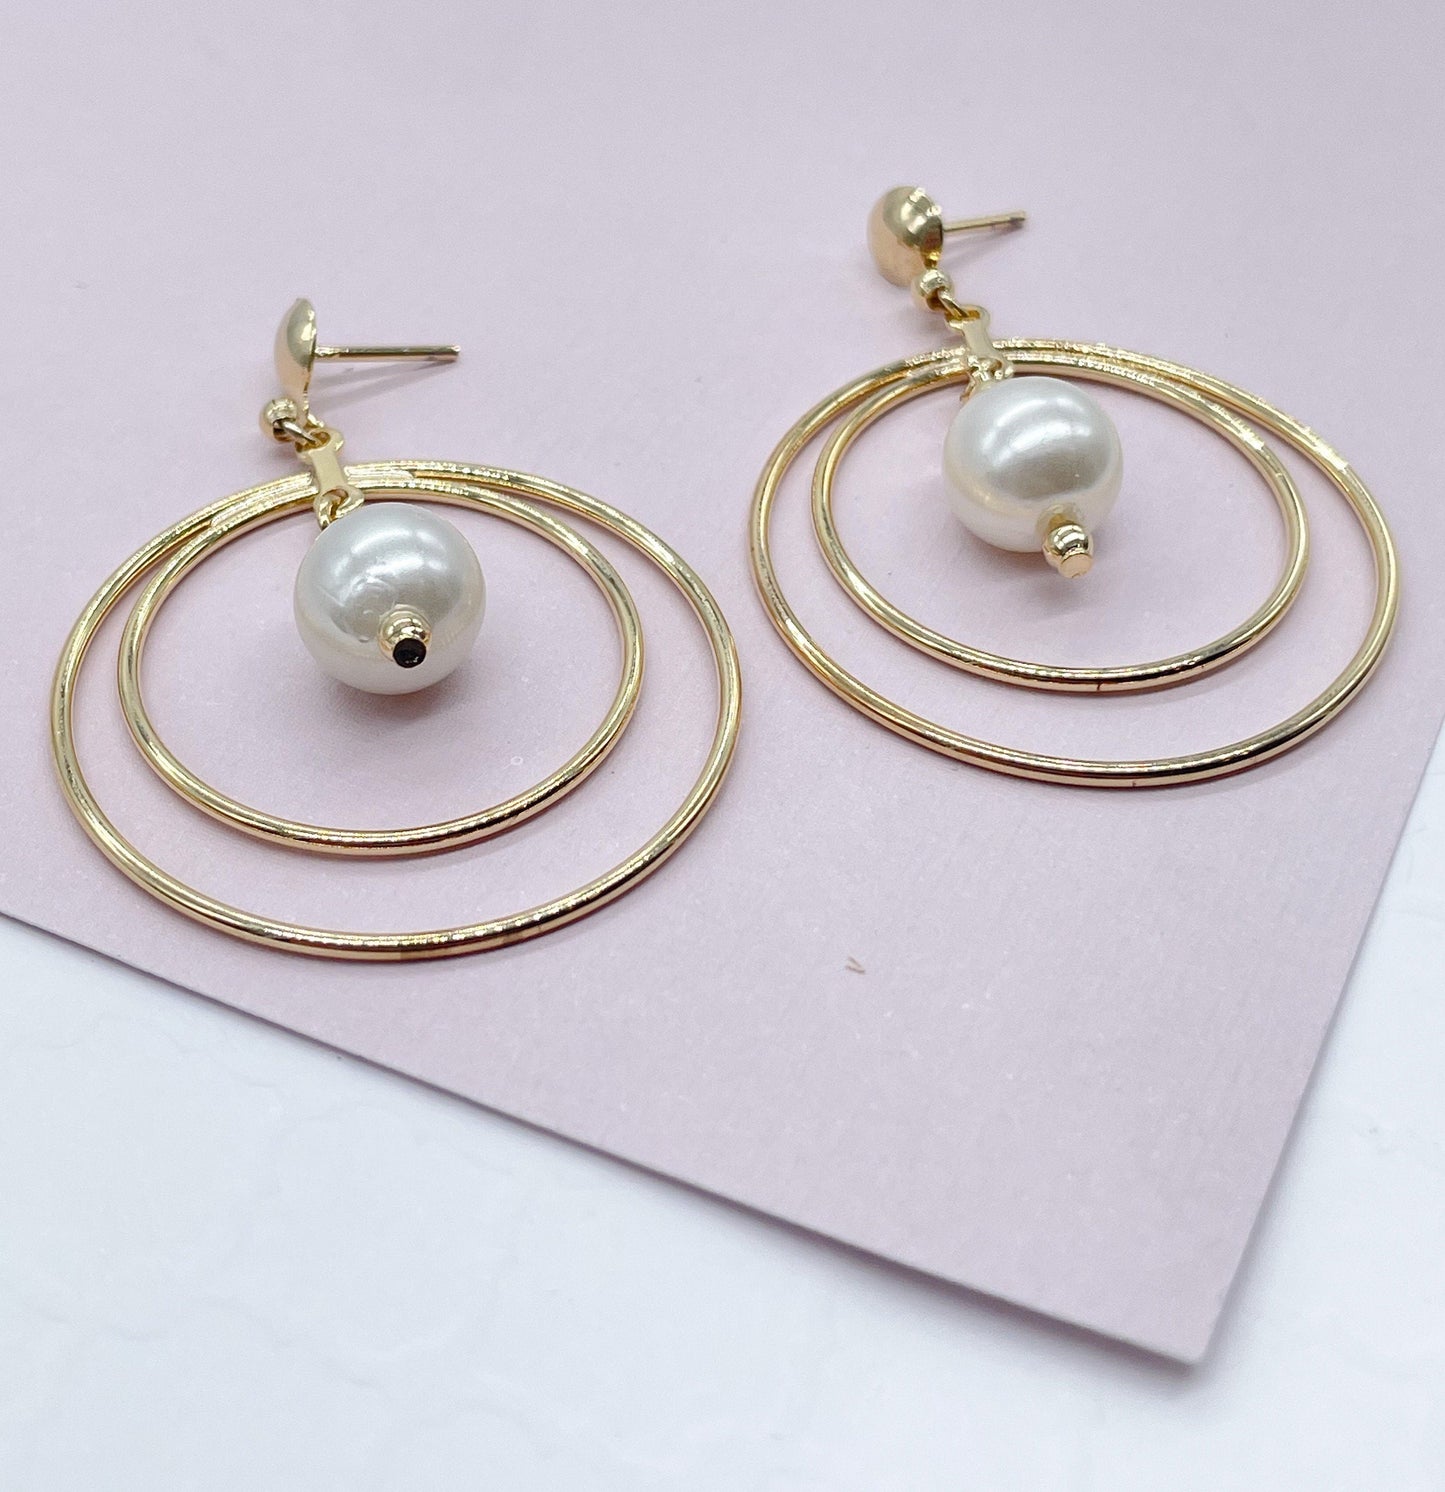 18k Gold Layered Double Stacked Hoop Earrings Featuring Simulated Pearl